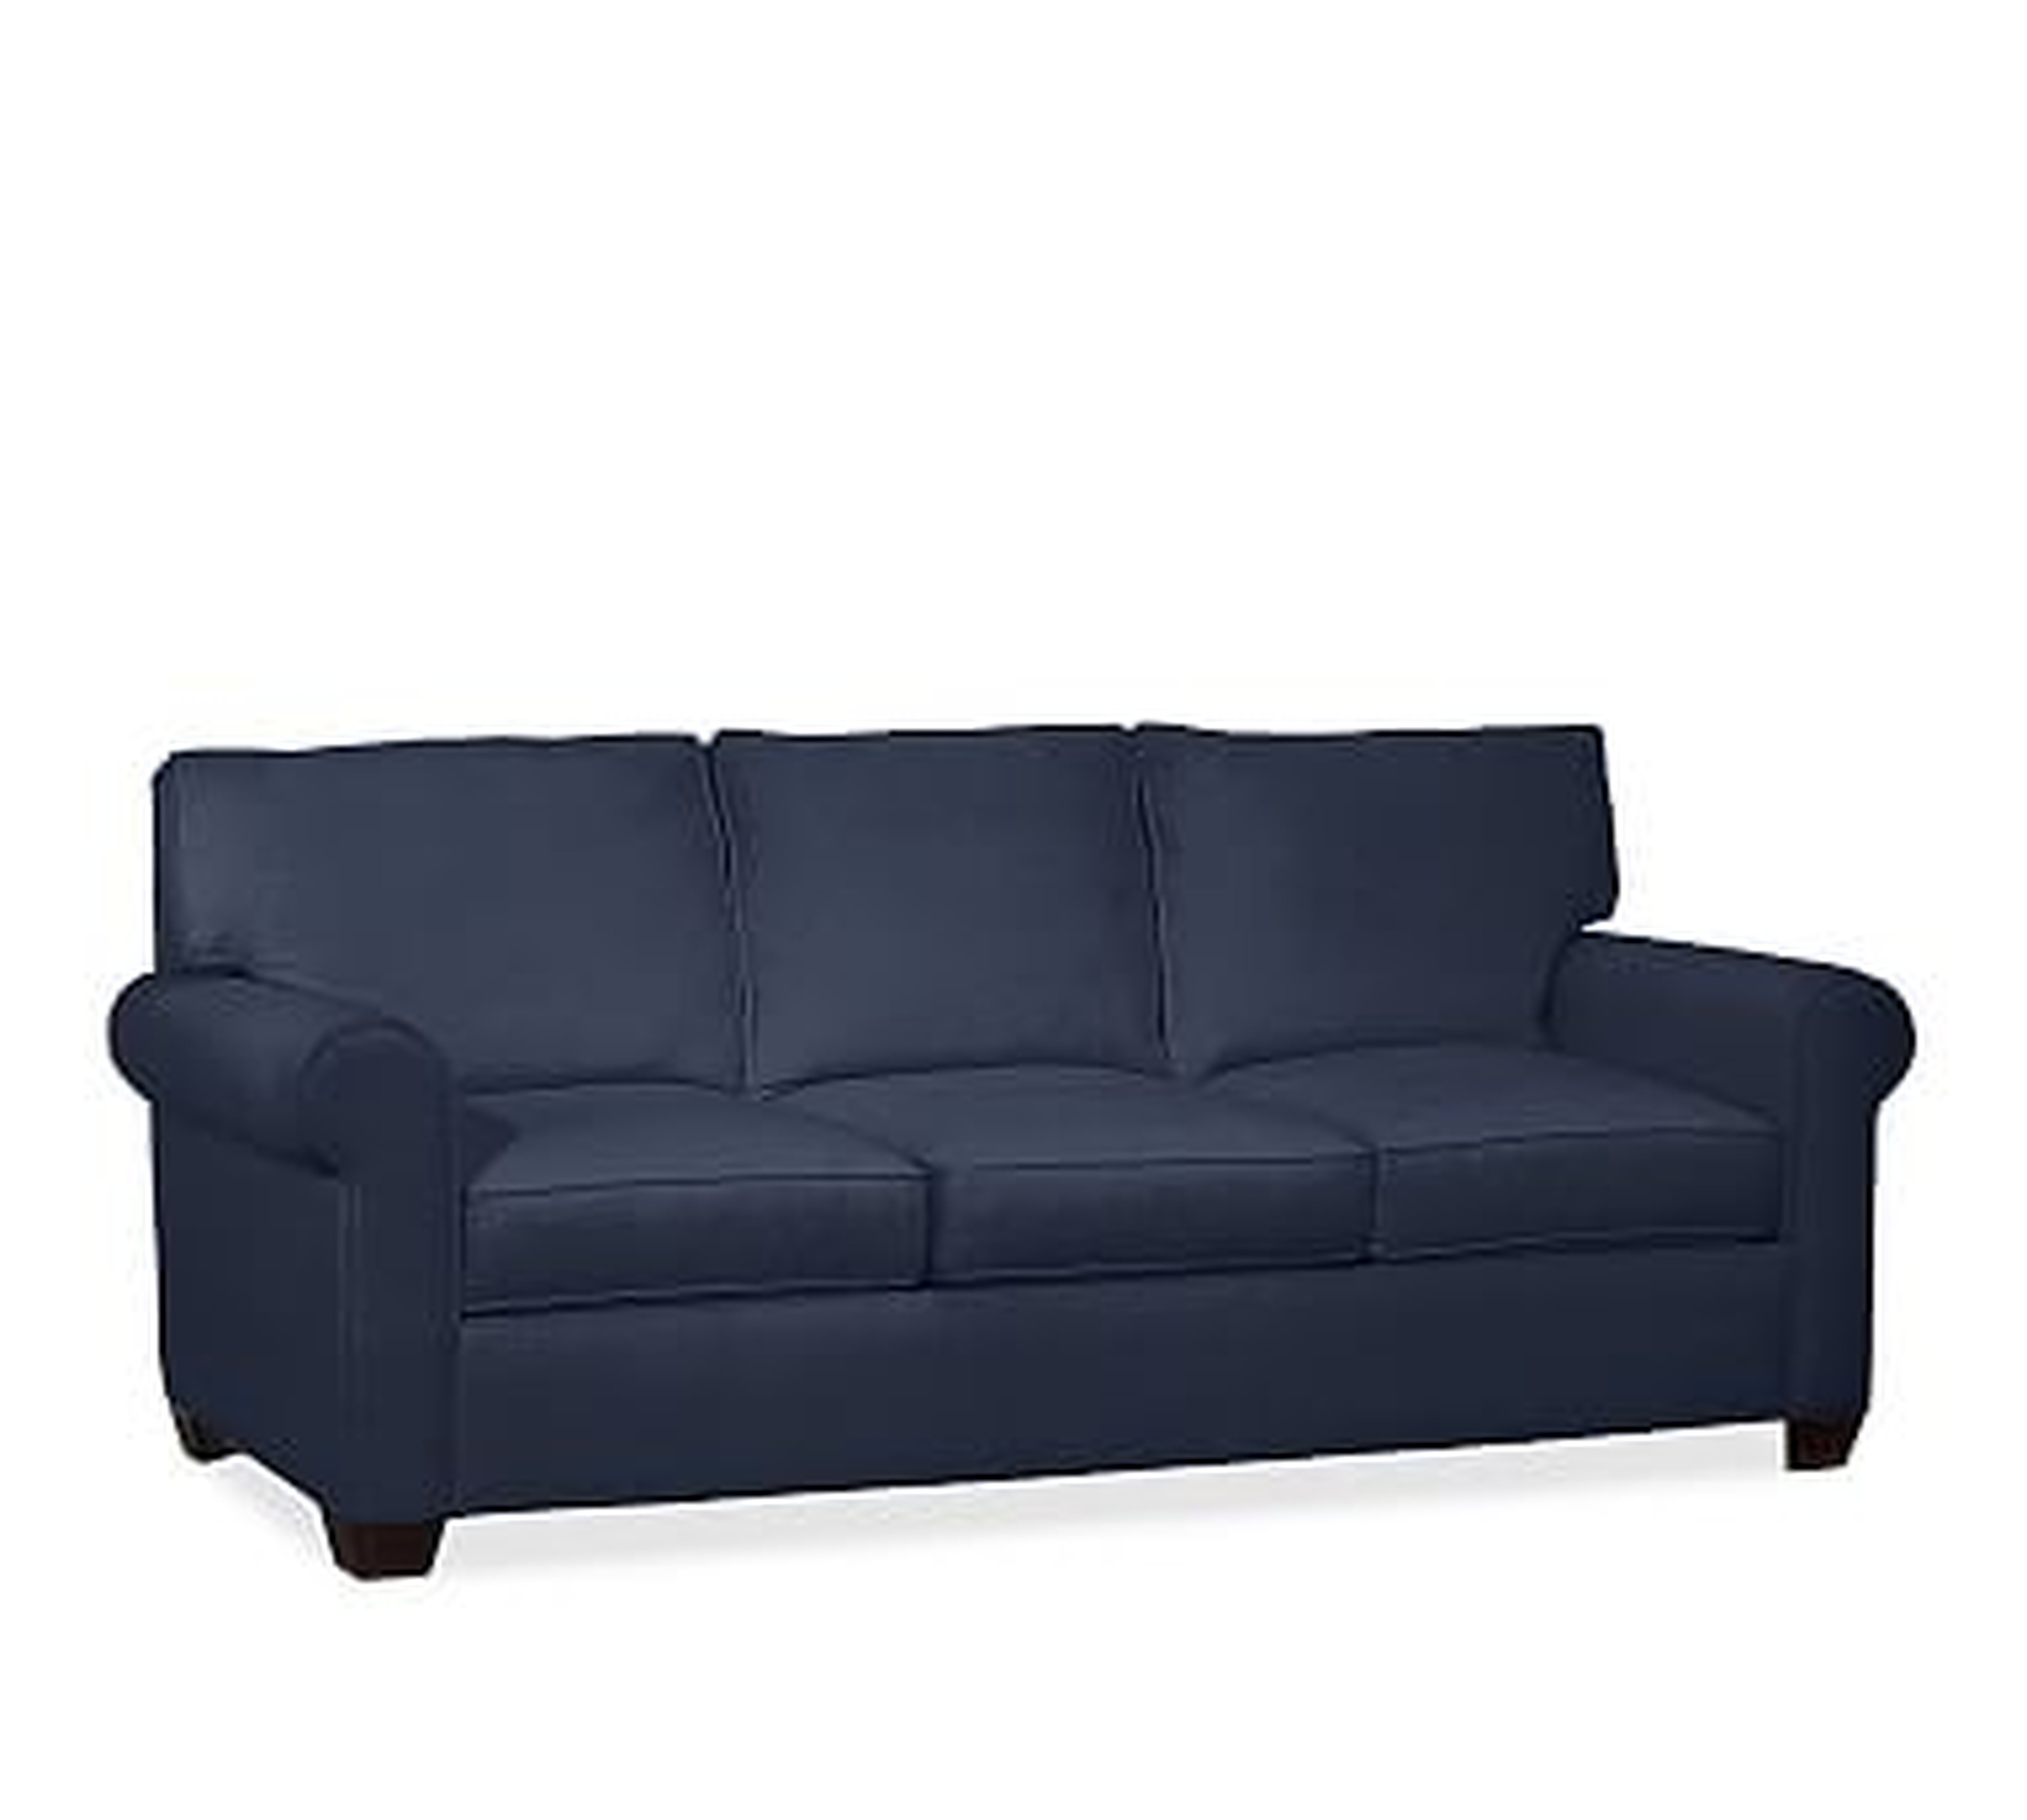 Buchanan Roll Arm Upholstered Grand Sofa 93.5", Polyester Wrapped Cushions, Performance Twill Cadet Navy - Pottery Barn